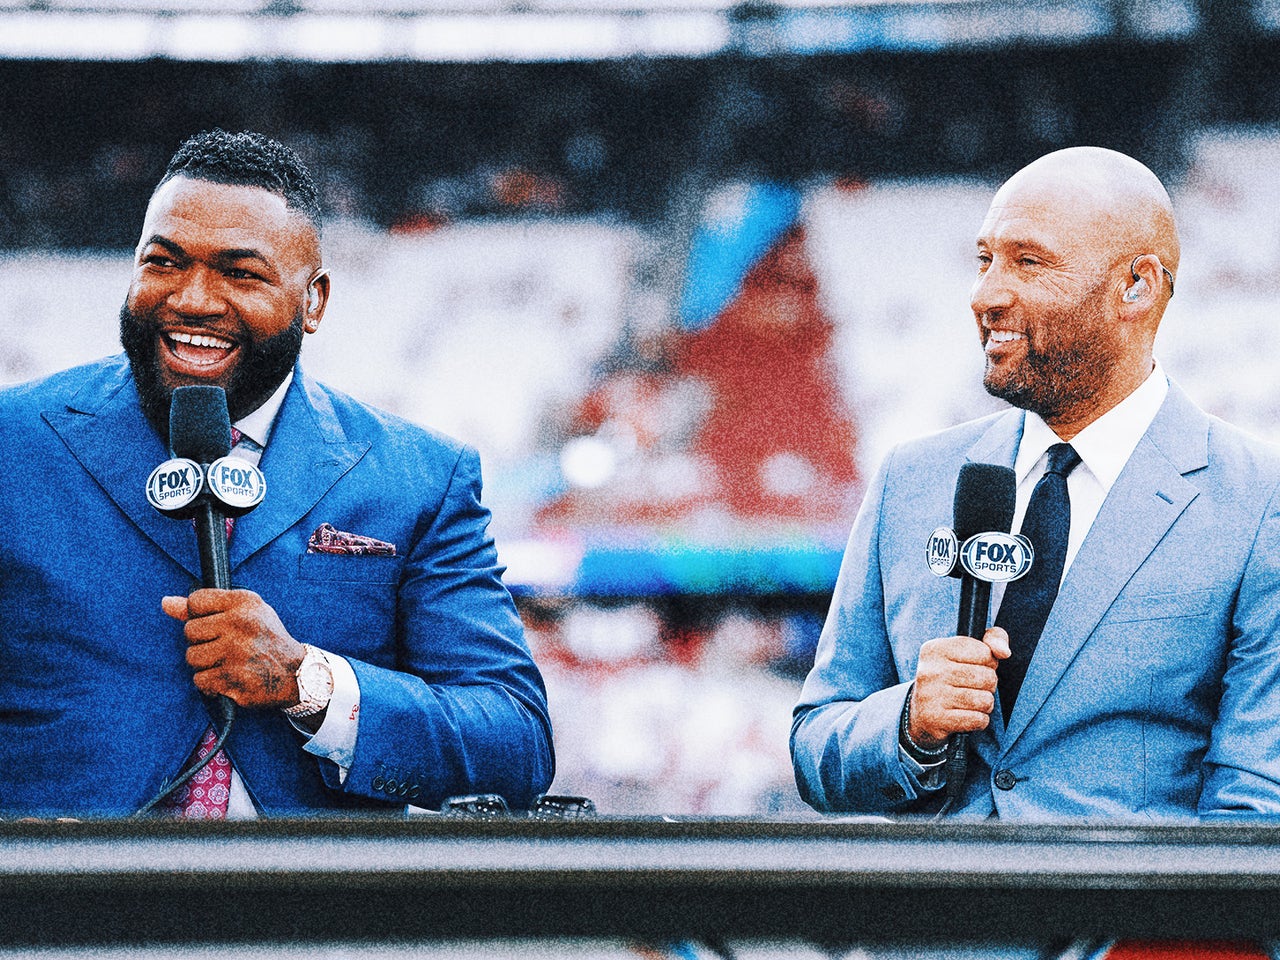 SEE IT: David Ortiz says 'hopefully' he gets a jersey retirement ceremony  at Fenway Park on par with Derek Jeter's Yankees bash – New York Daily News